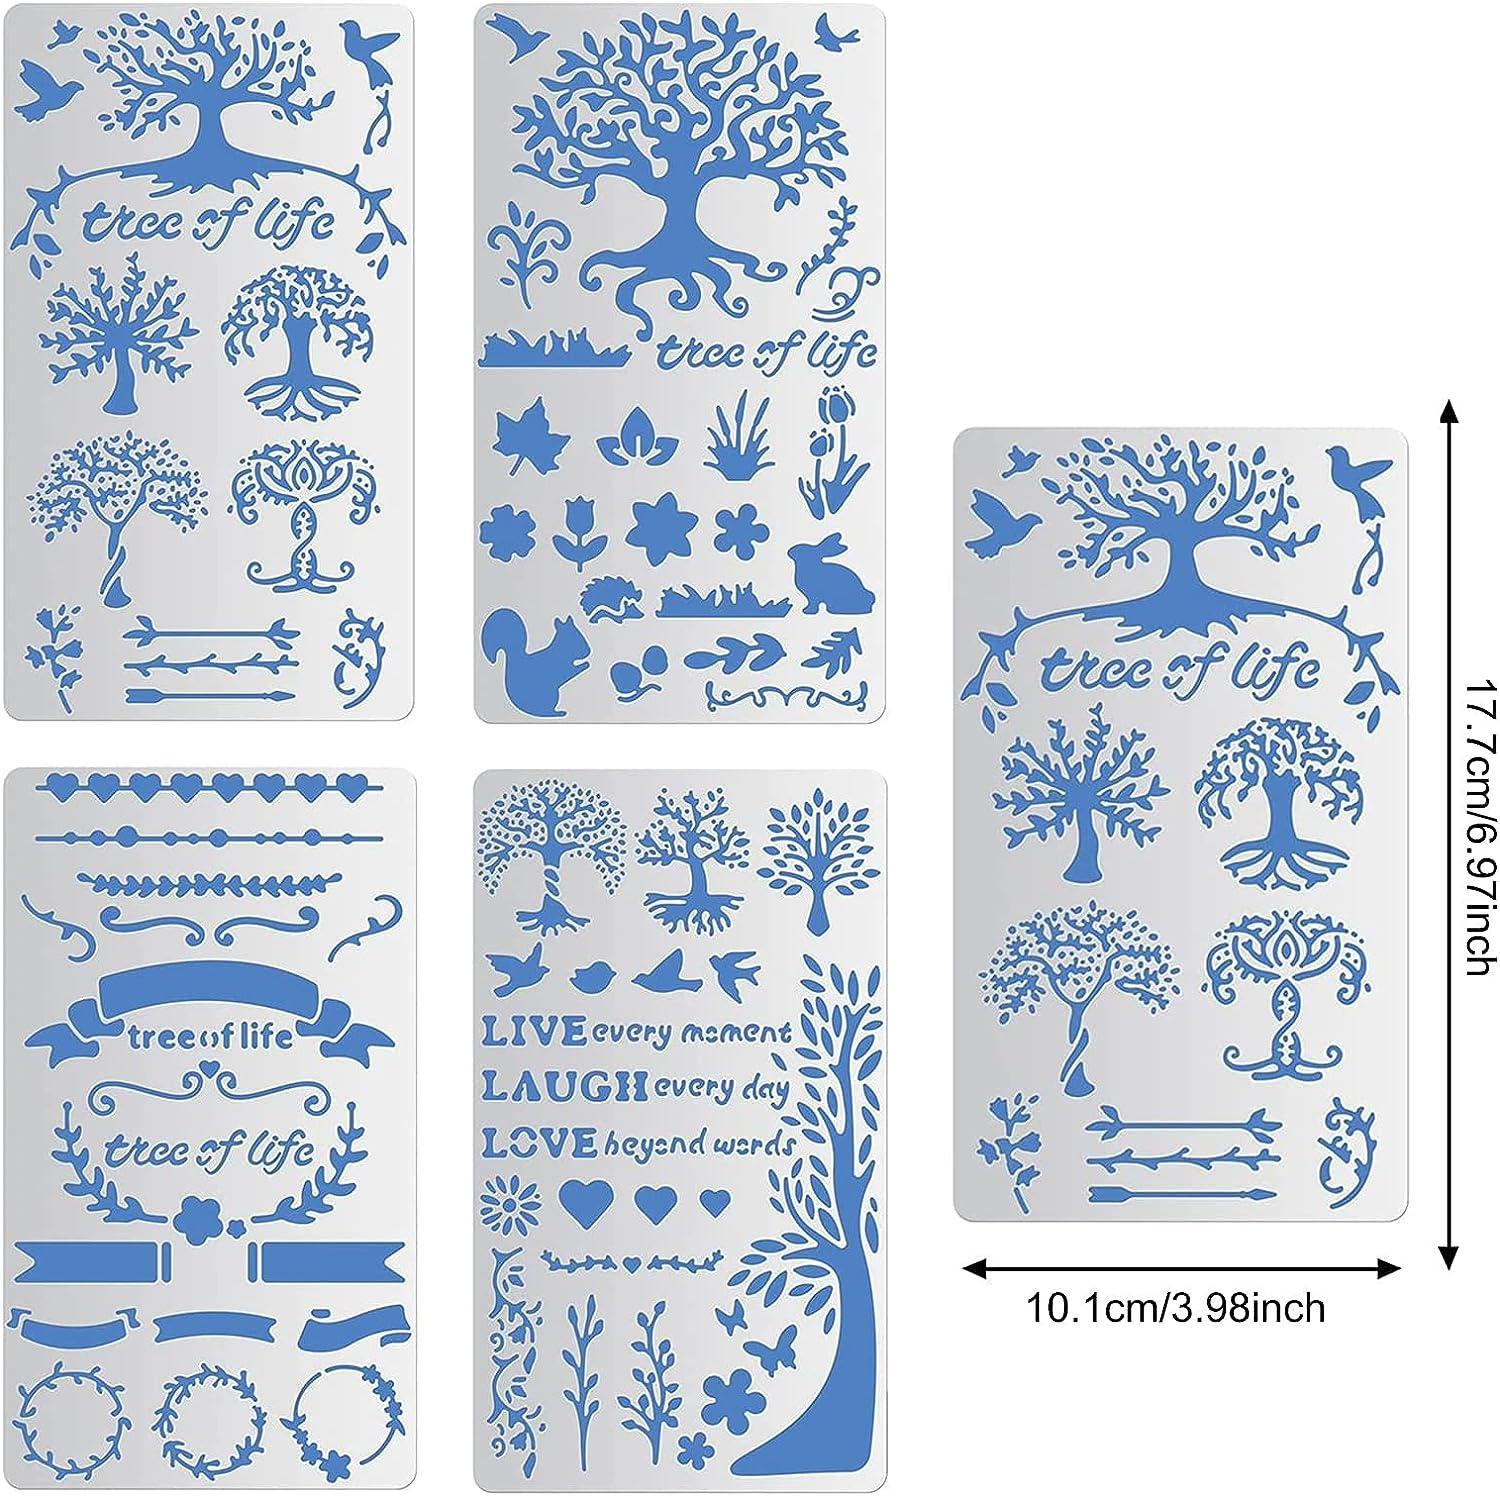 BENECREAT 4PCS 4x7 Inch Tree of Life Metal Stencils Animal Leaves Vine  Stencils Templates for Wood Carving, Drawings and Woodburning, Engraving  and Scrapbooking Project 4 Tree of Life